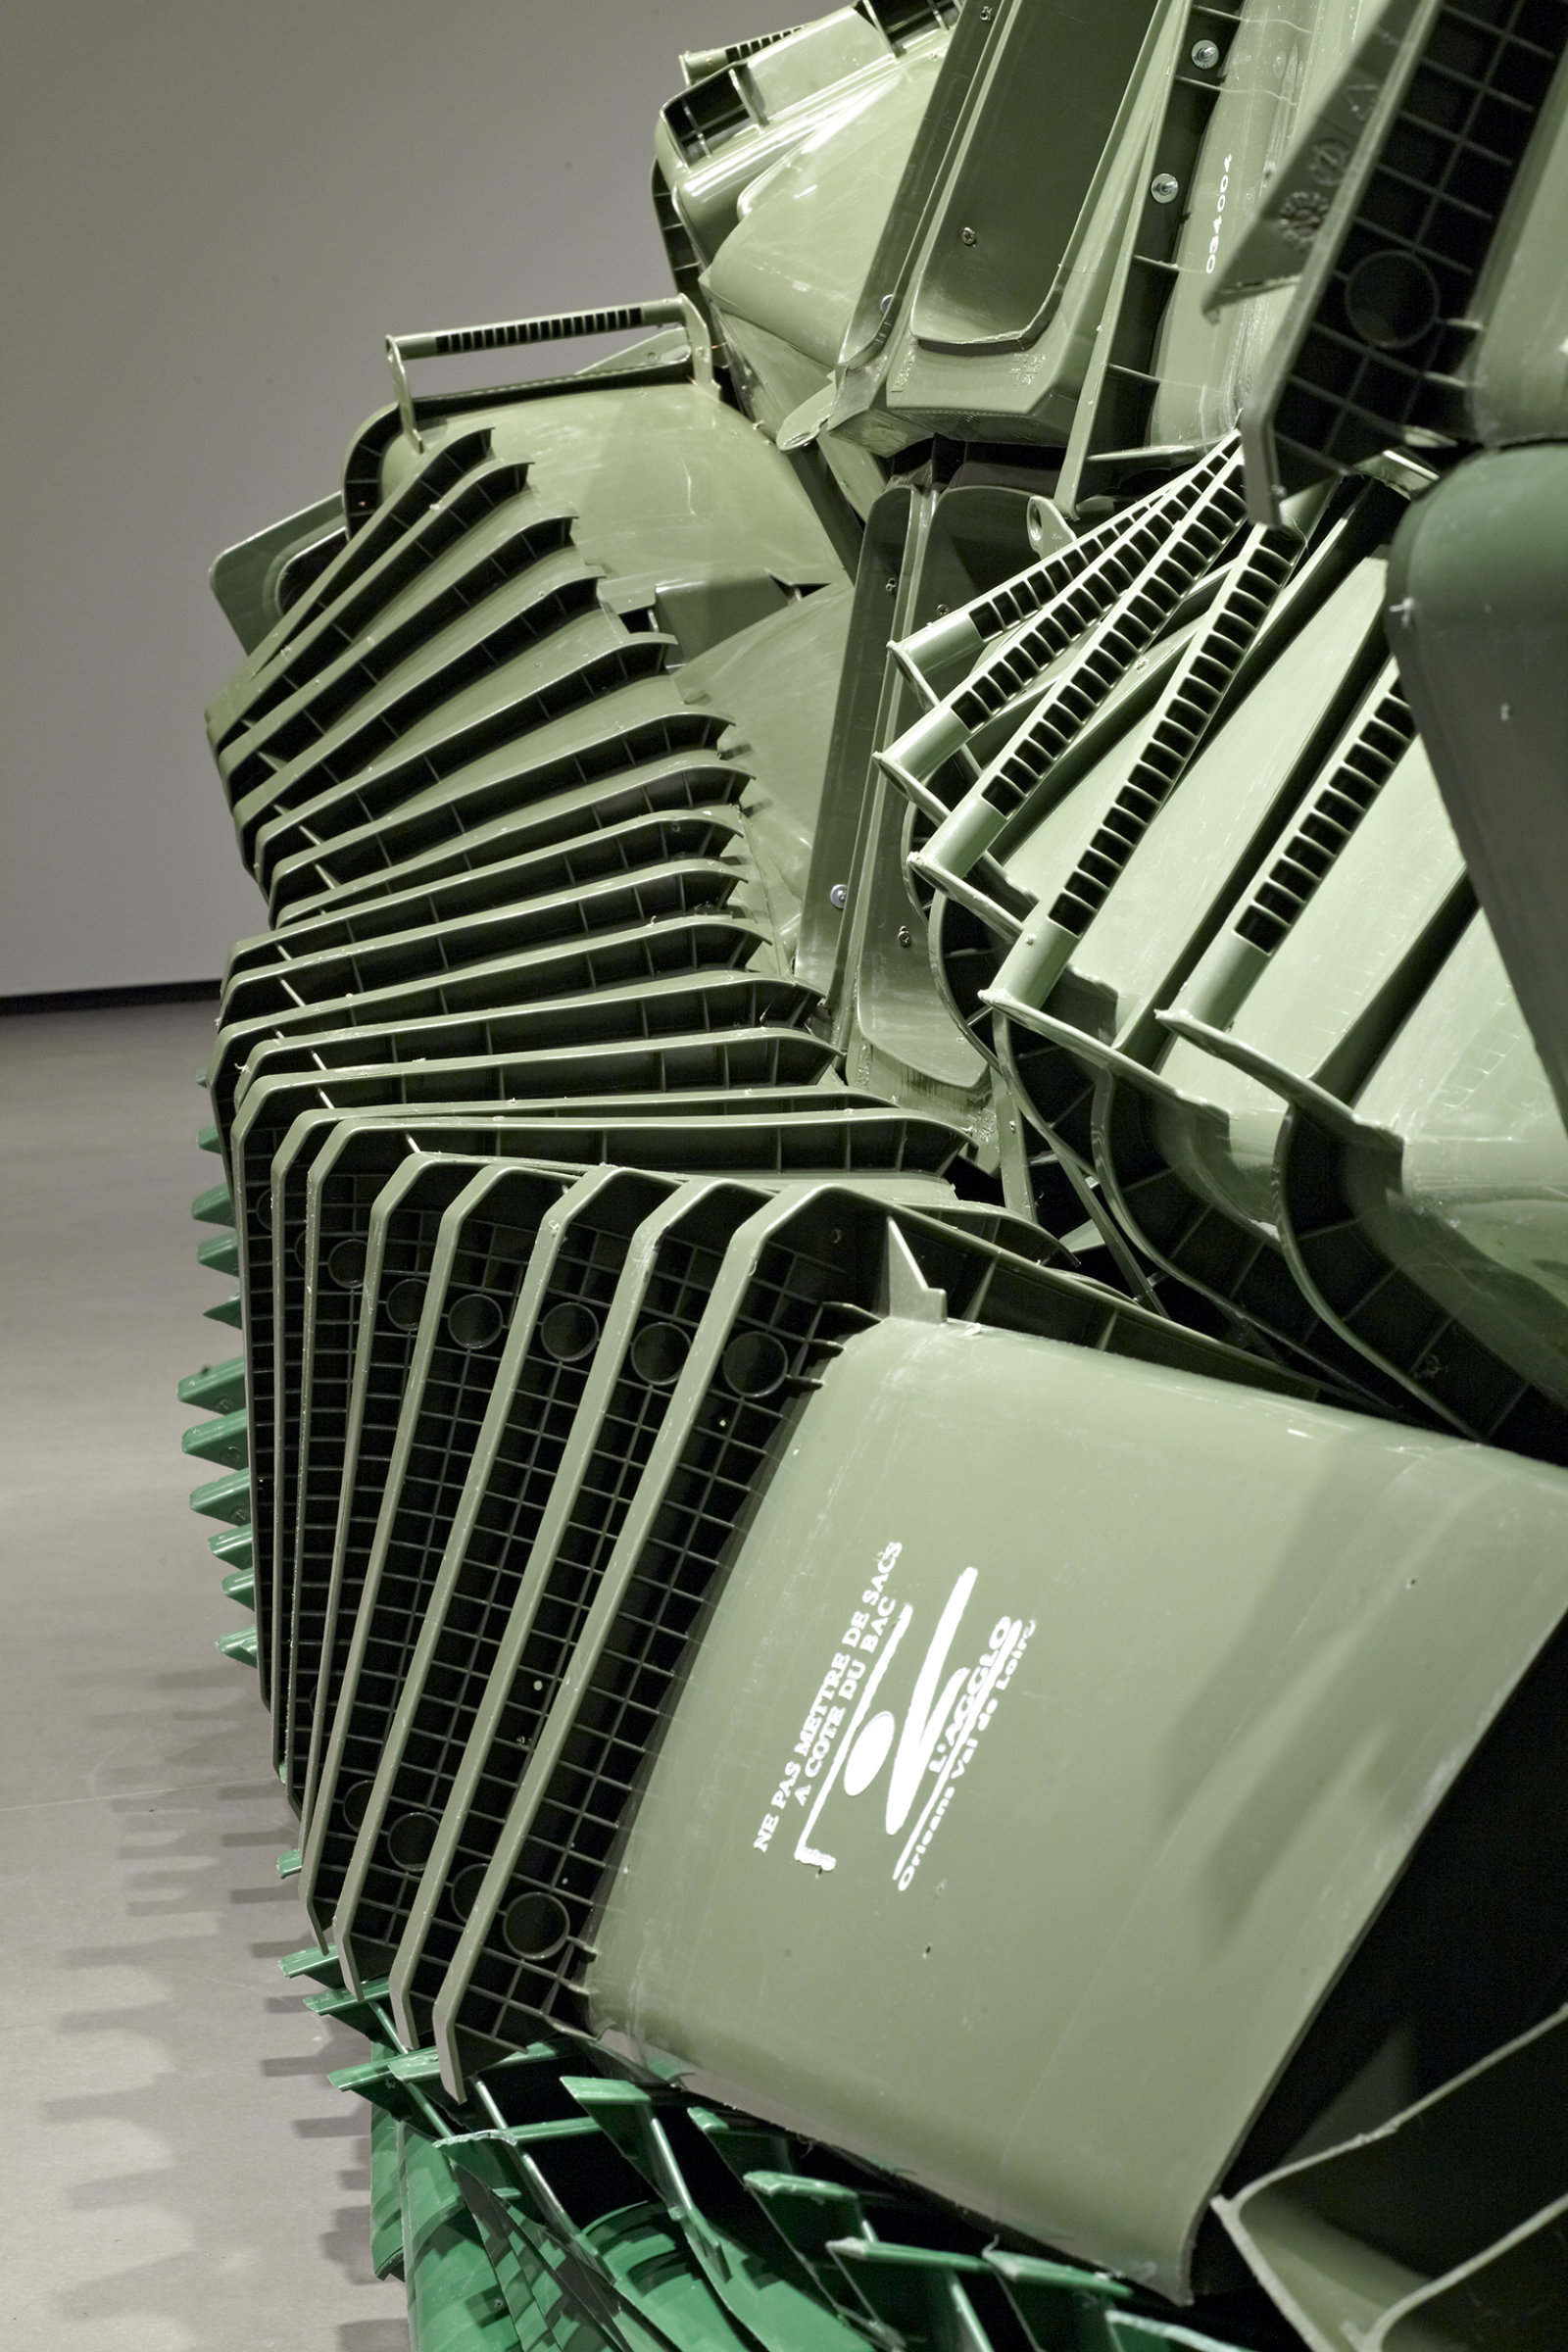 Brian Jungen, Carapace (detail), 2009–2011, plastic recycling containers, 144 x 264 x 252 in. (370 x 670 x 640 cm). Installation view, Art Gallery of Alberta, Edmonton, AB, 2011